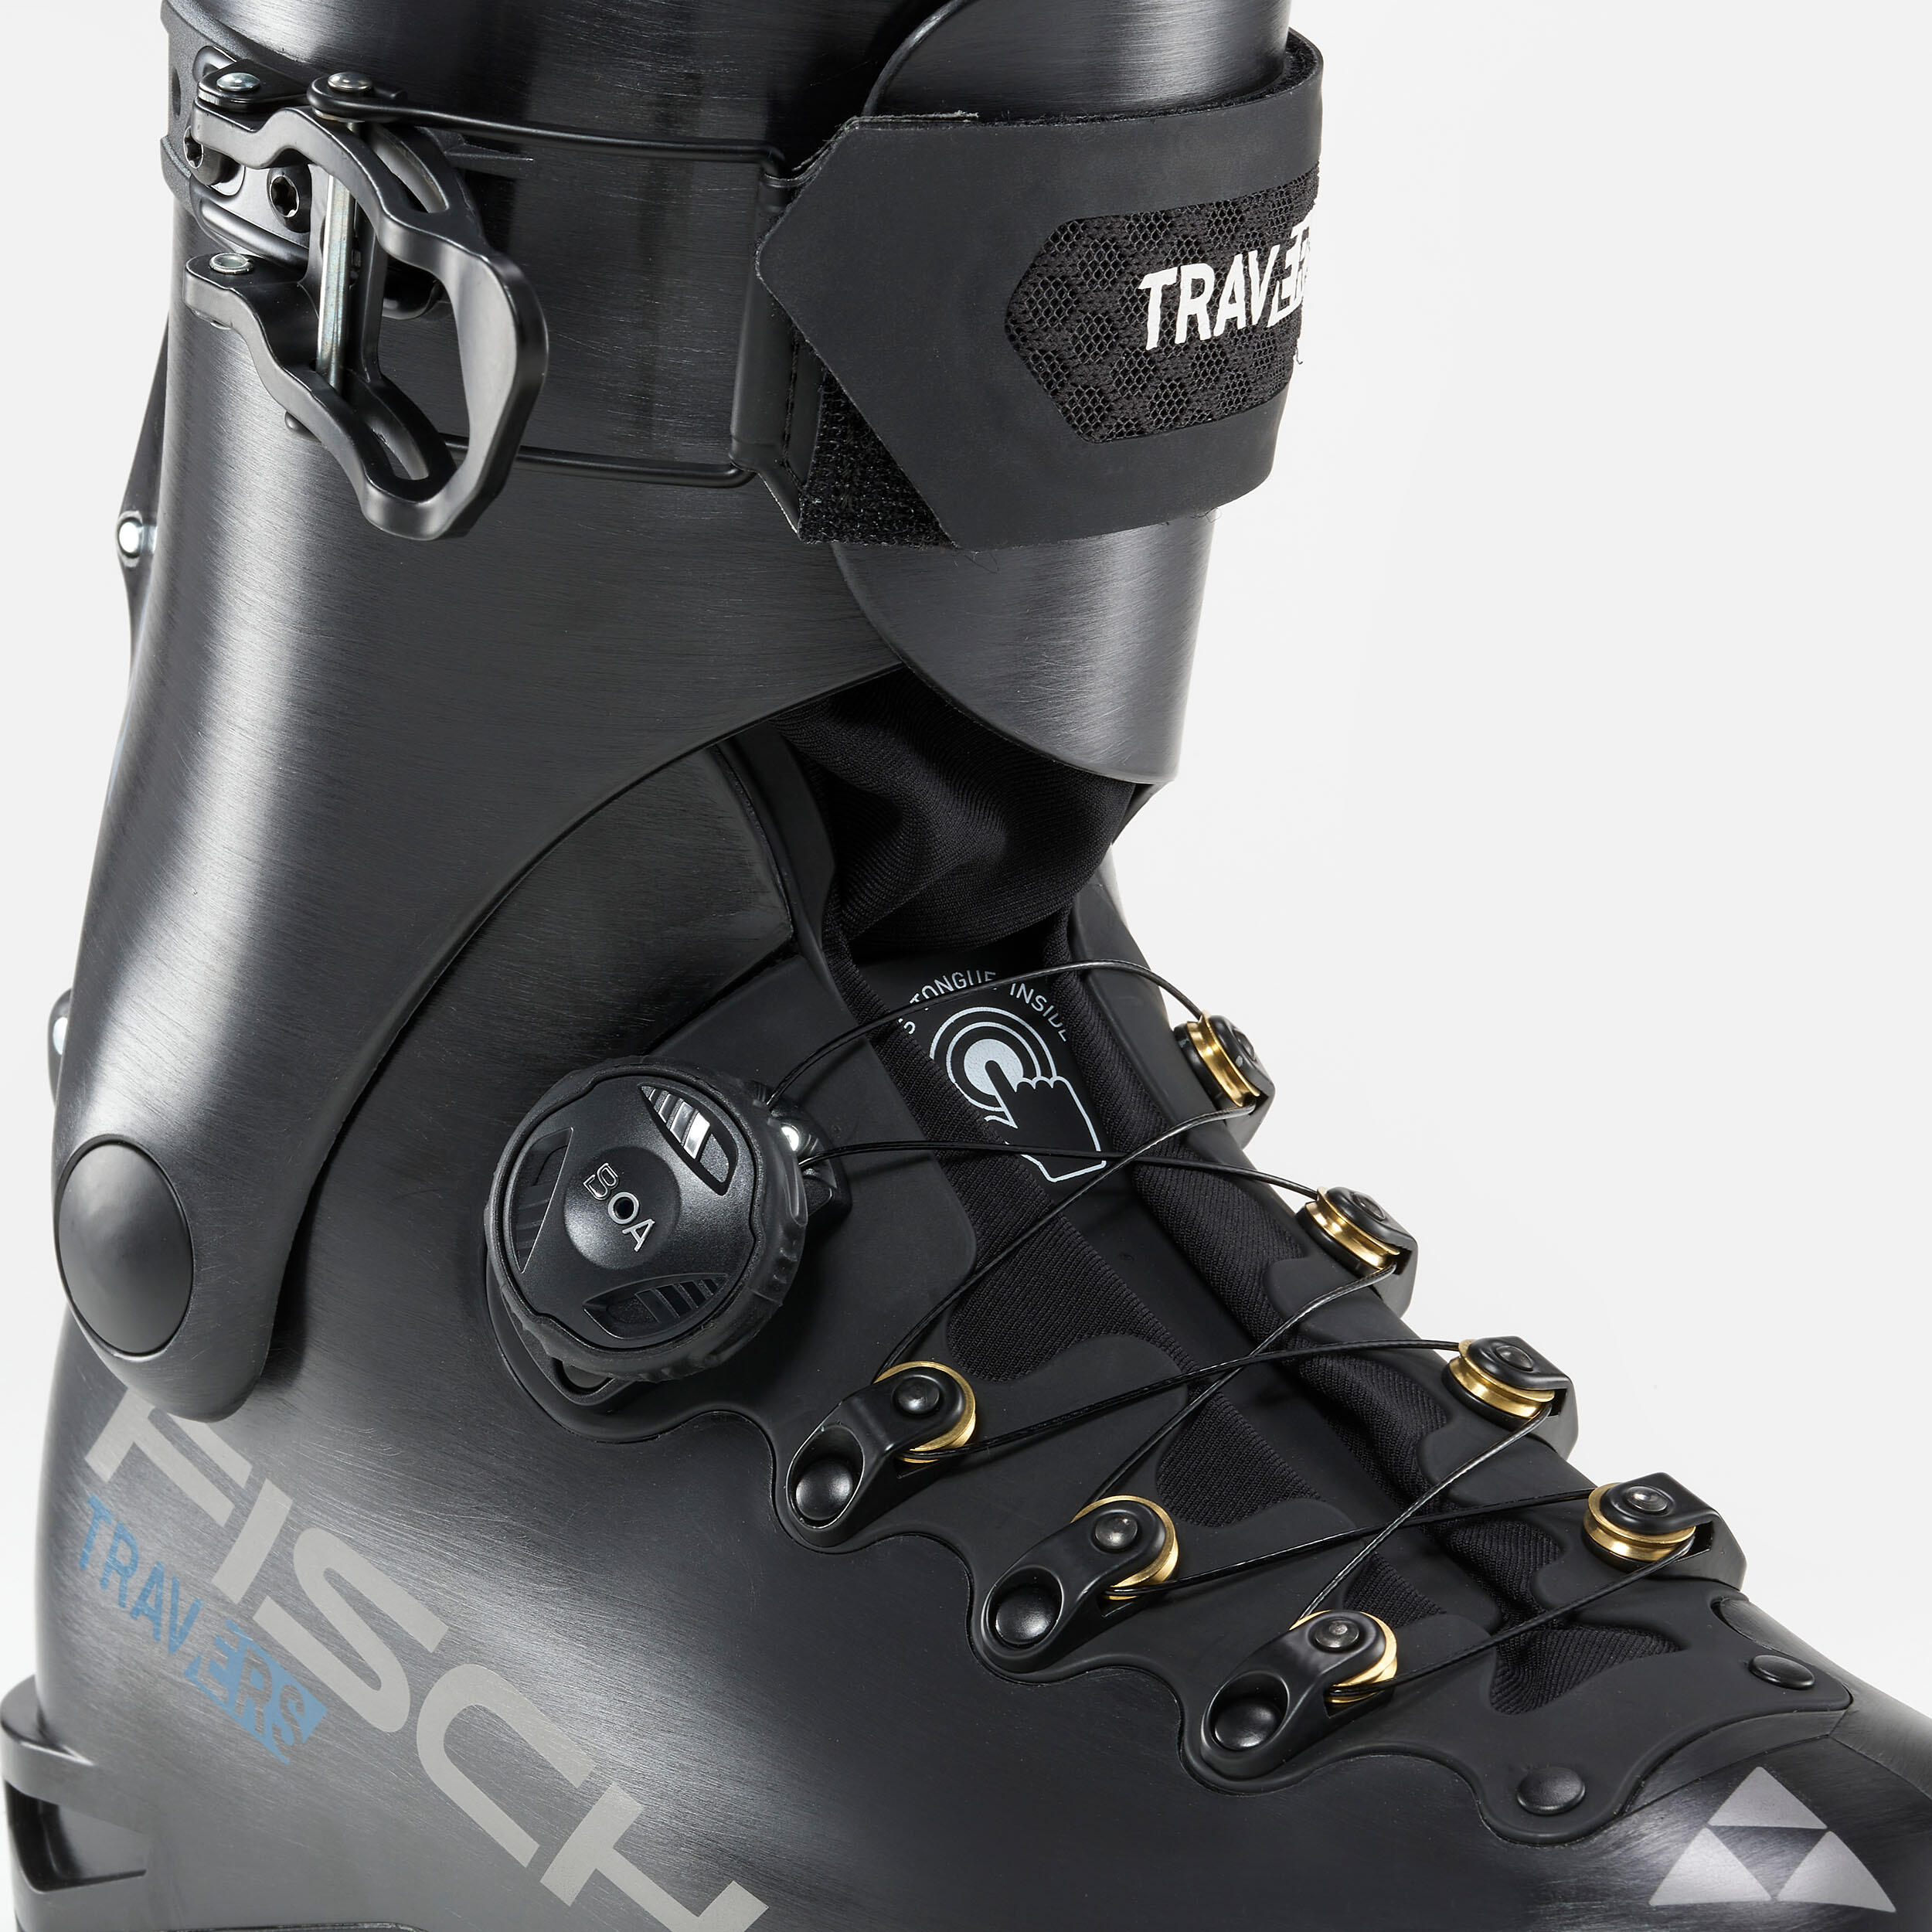 ADULT SKI TOURING BOOTS - FISCHER TRAVERS TS 4/10